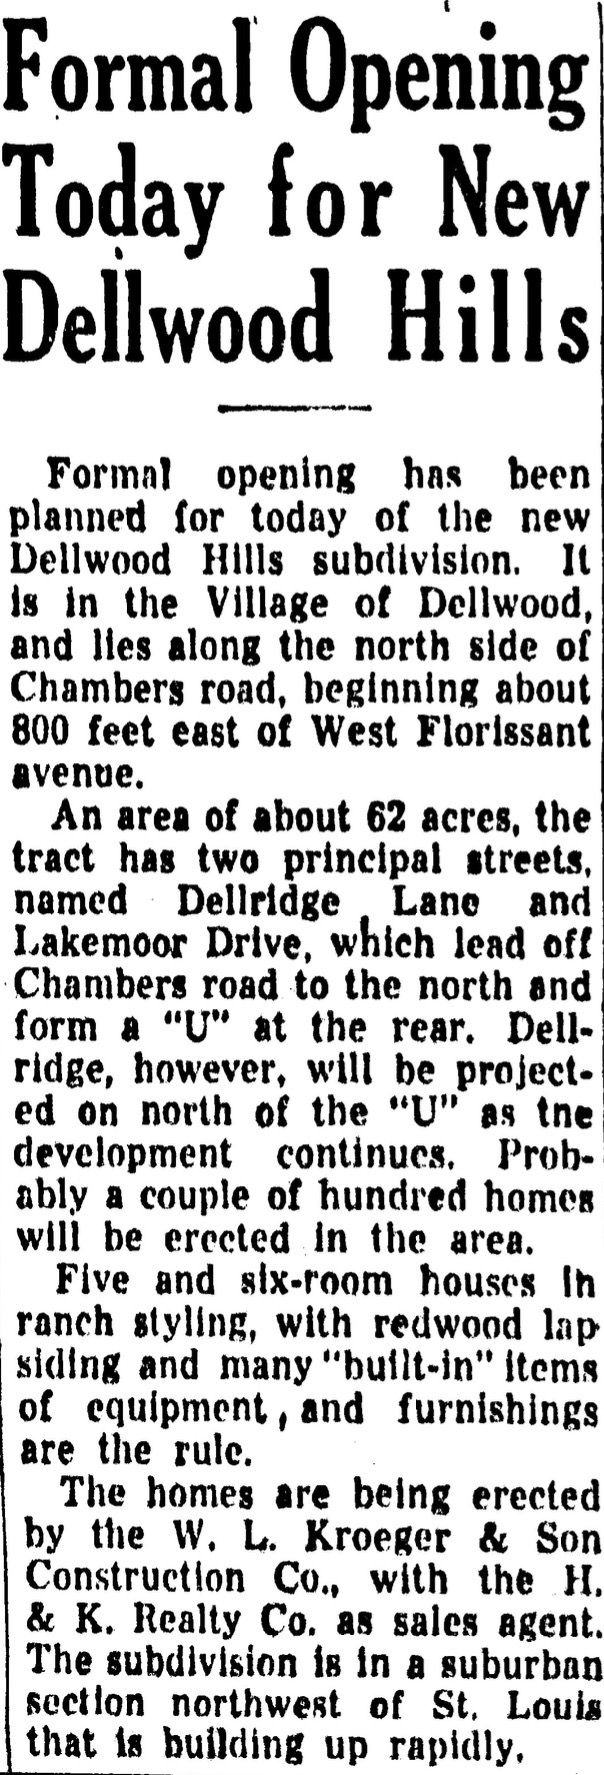 Dellwood Hills Formal Opening notice appeared in the St. Louis Post-Dispatch on March 7, 1954. 